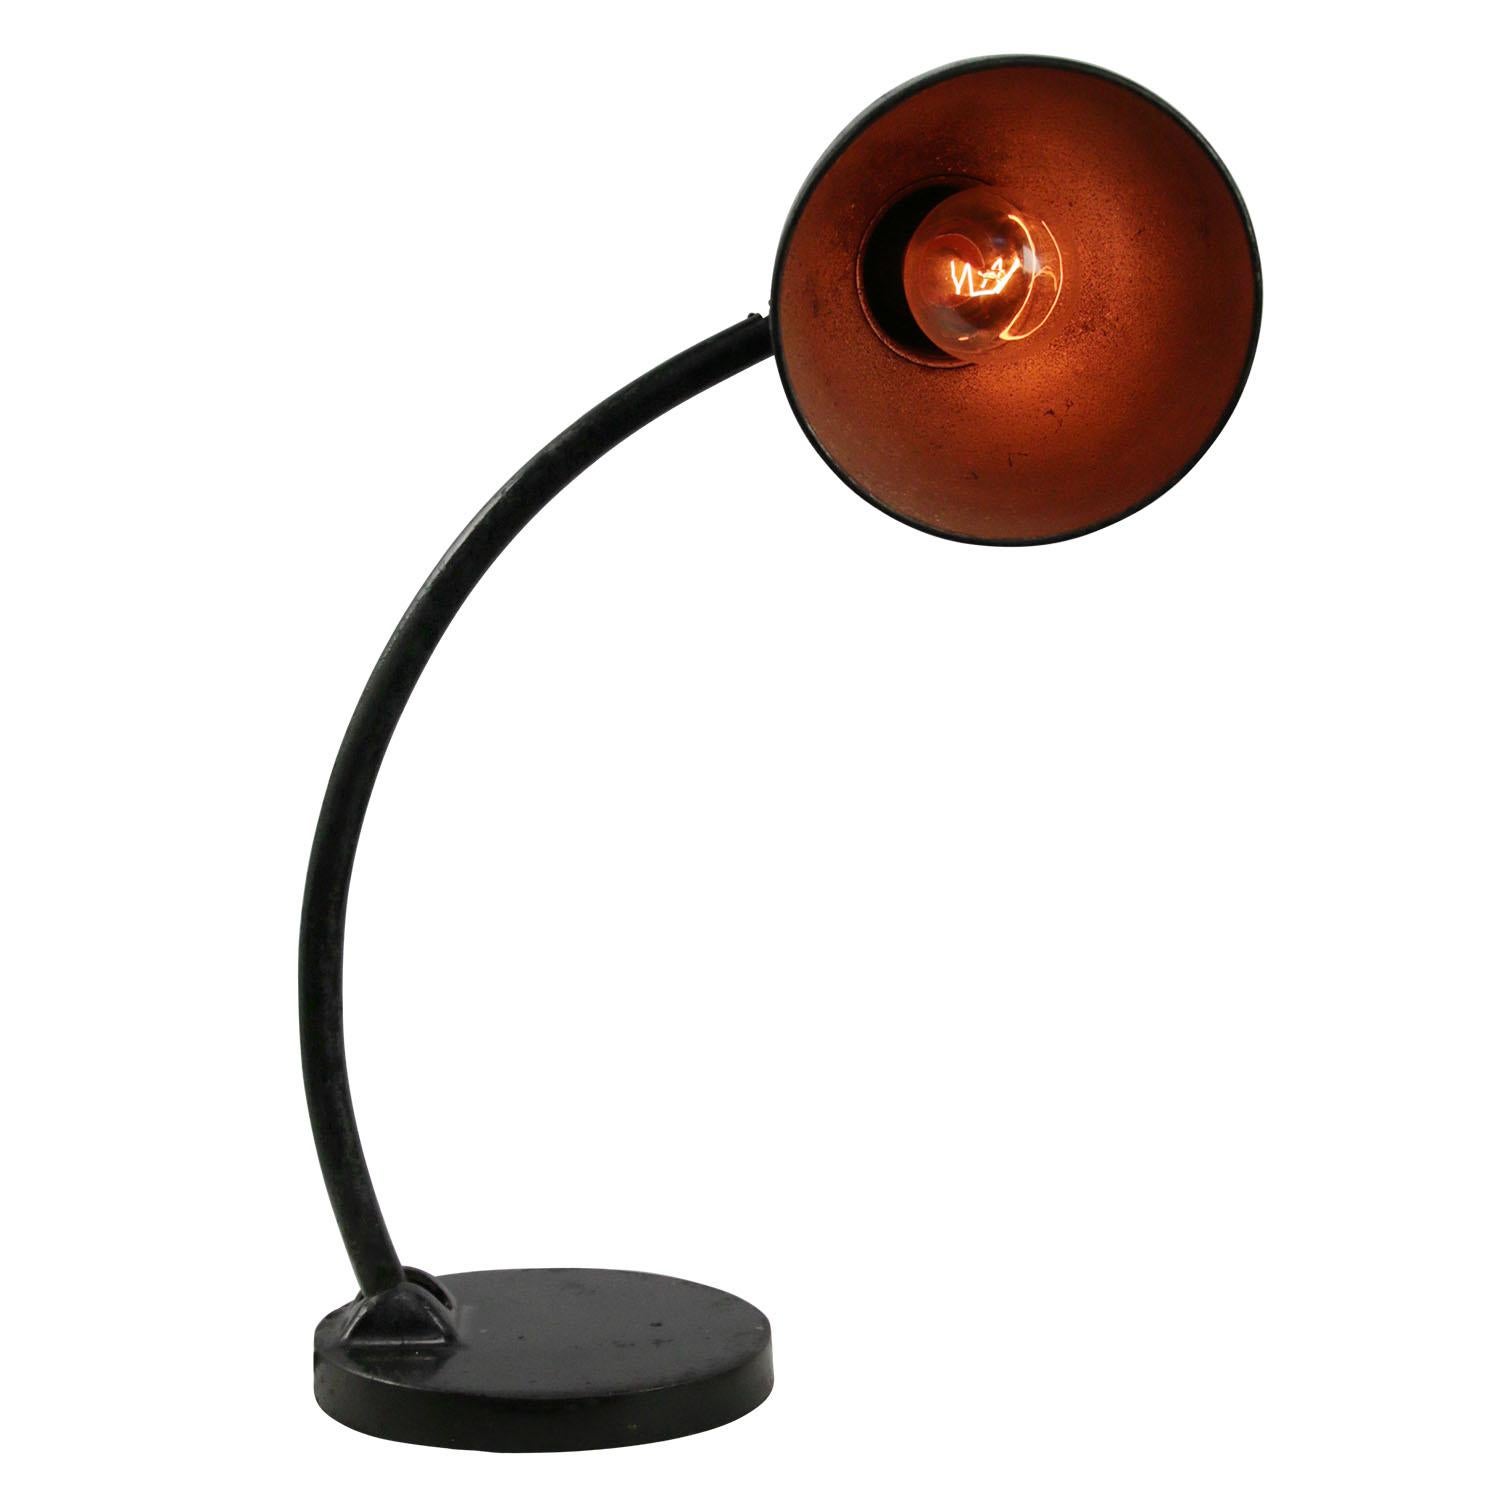 Black metal desk light
2,5 meter black cotton flex, plug and switch

Also available with US/UK plug

Weight: 2.20 kg / 4.9 lb

Priced per individual item. All lamps have been made suitable by international standards for incandescent light